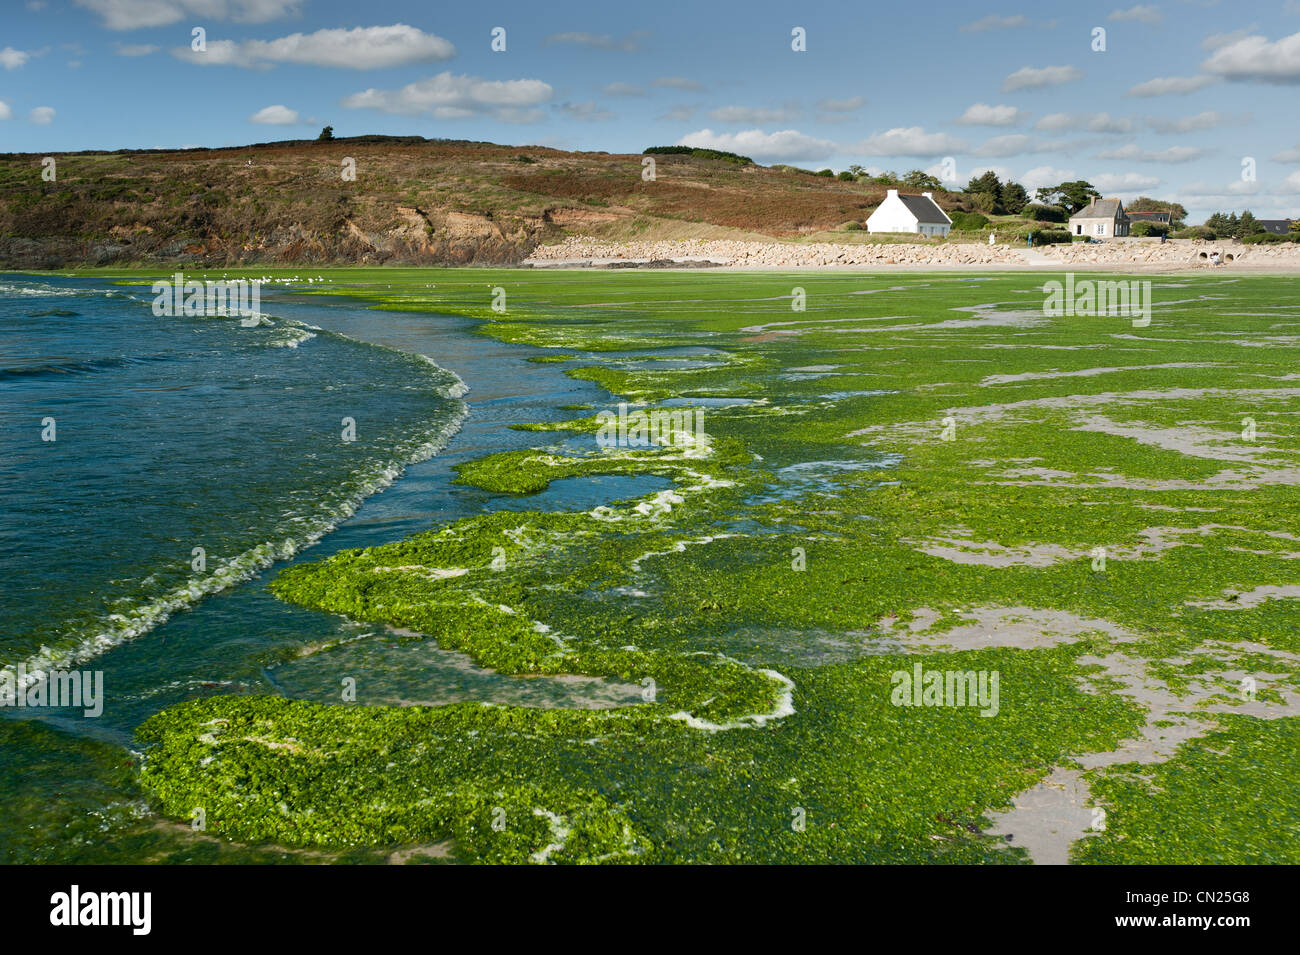 France, Finistere, Baie de Douarnenez, Ploeven, Ty an Quer beach cover by green algae Stock Photo